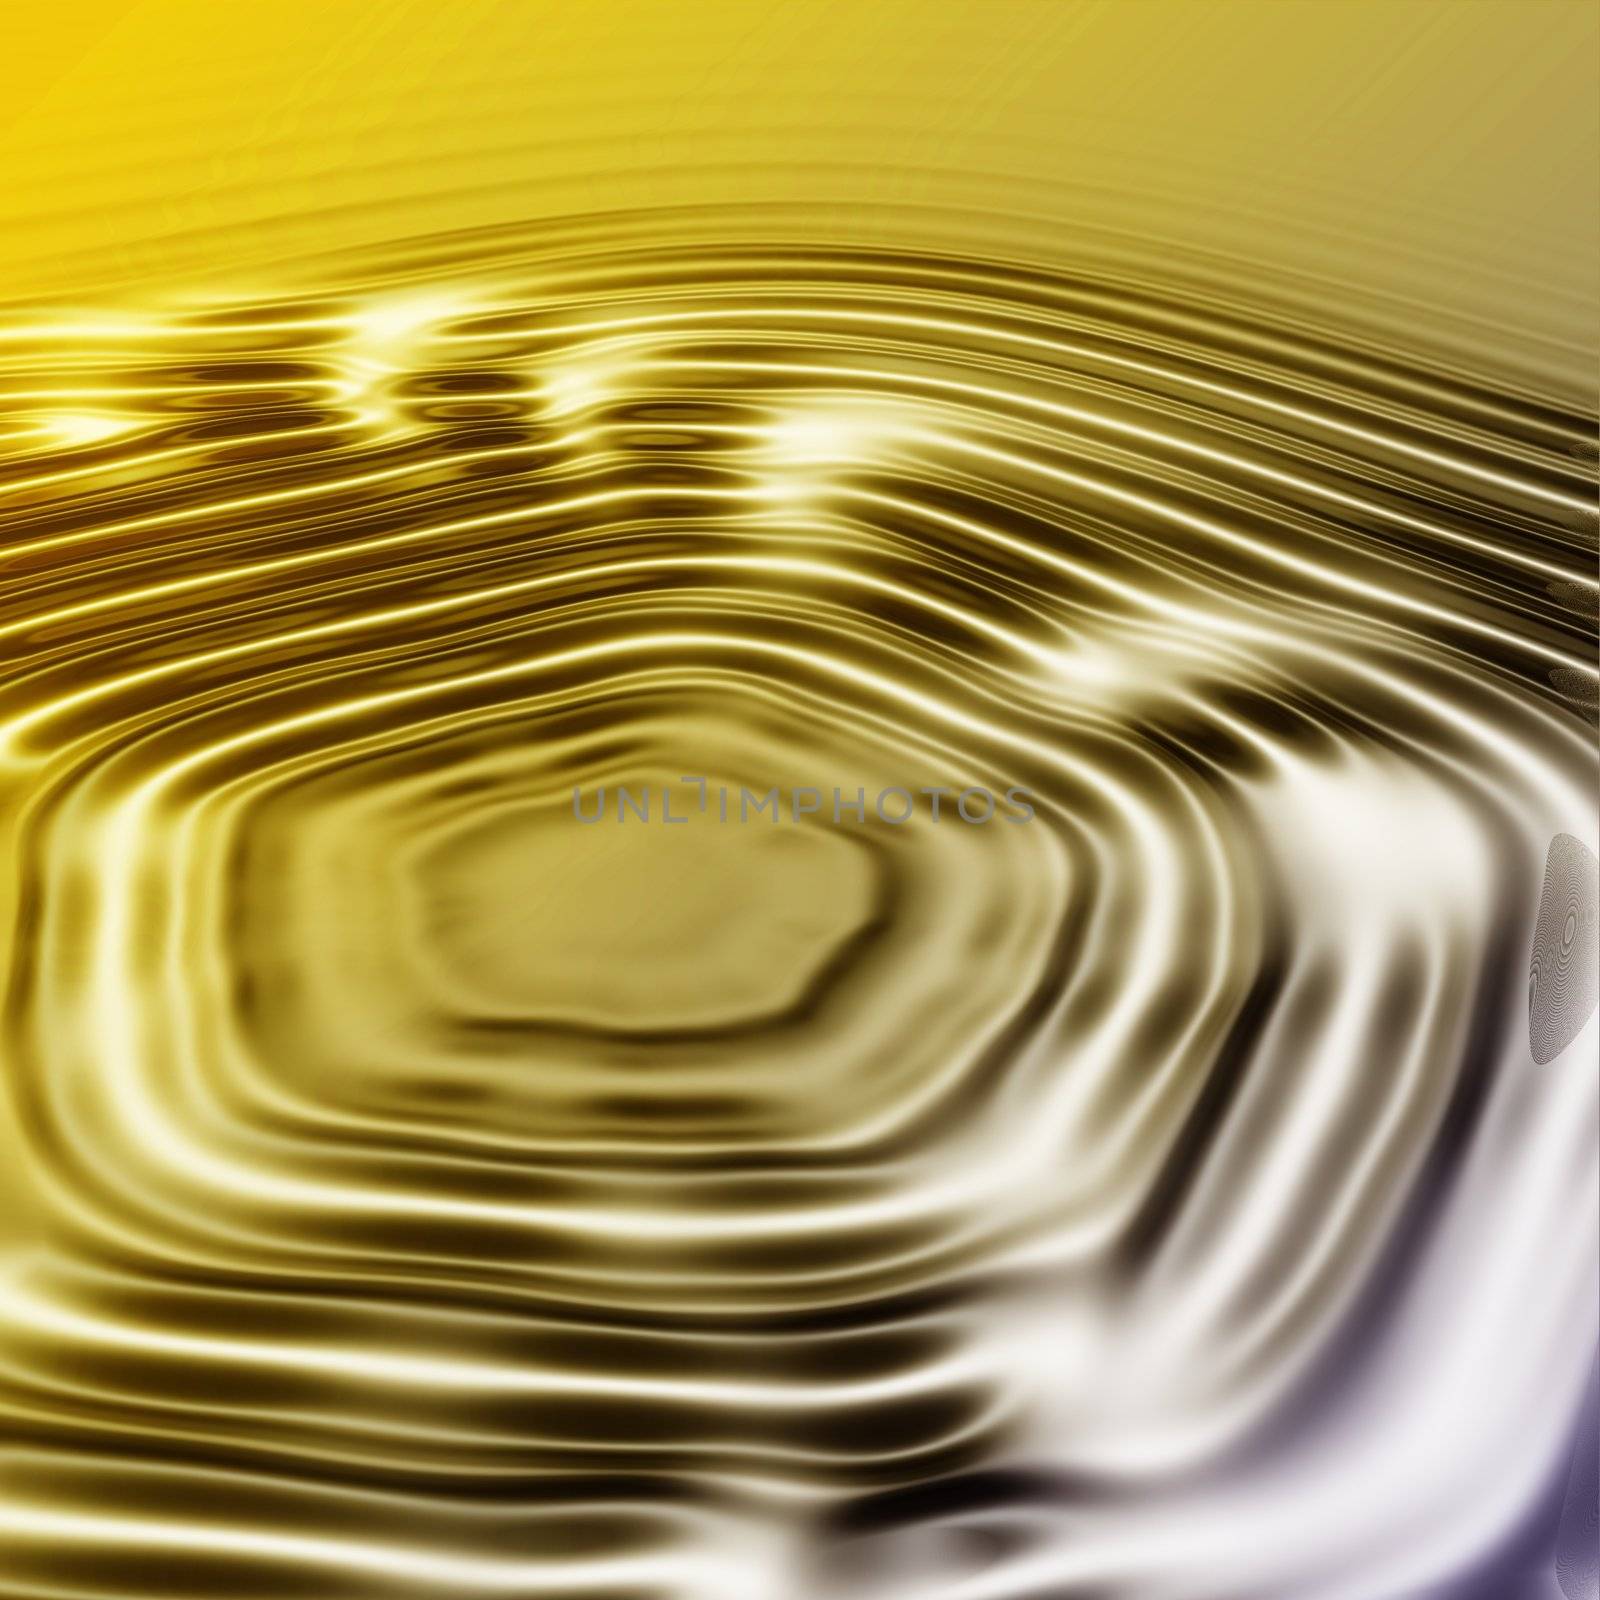 golden background with water ripples